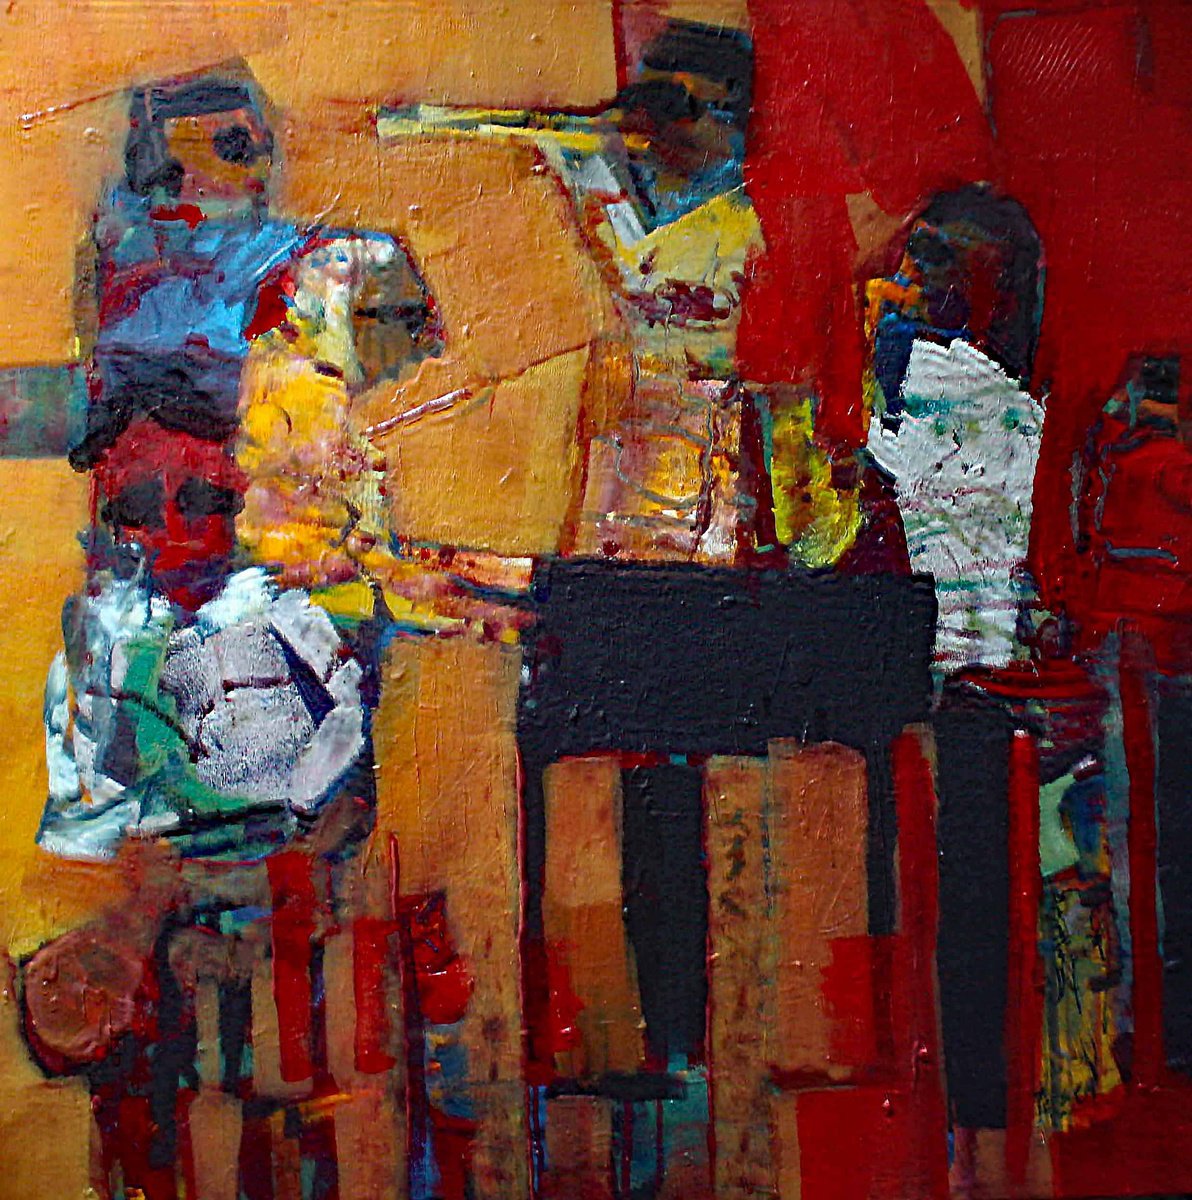 CONCENTRATION JAZZ by Jacques Donneaud